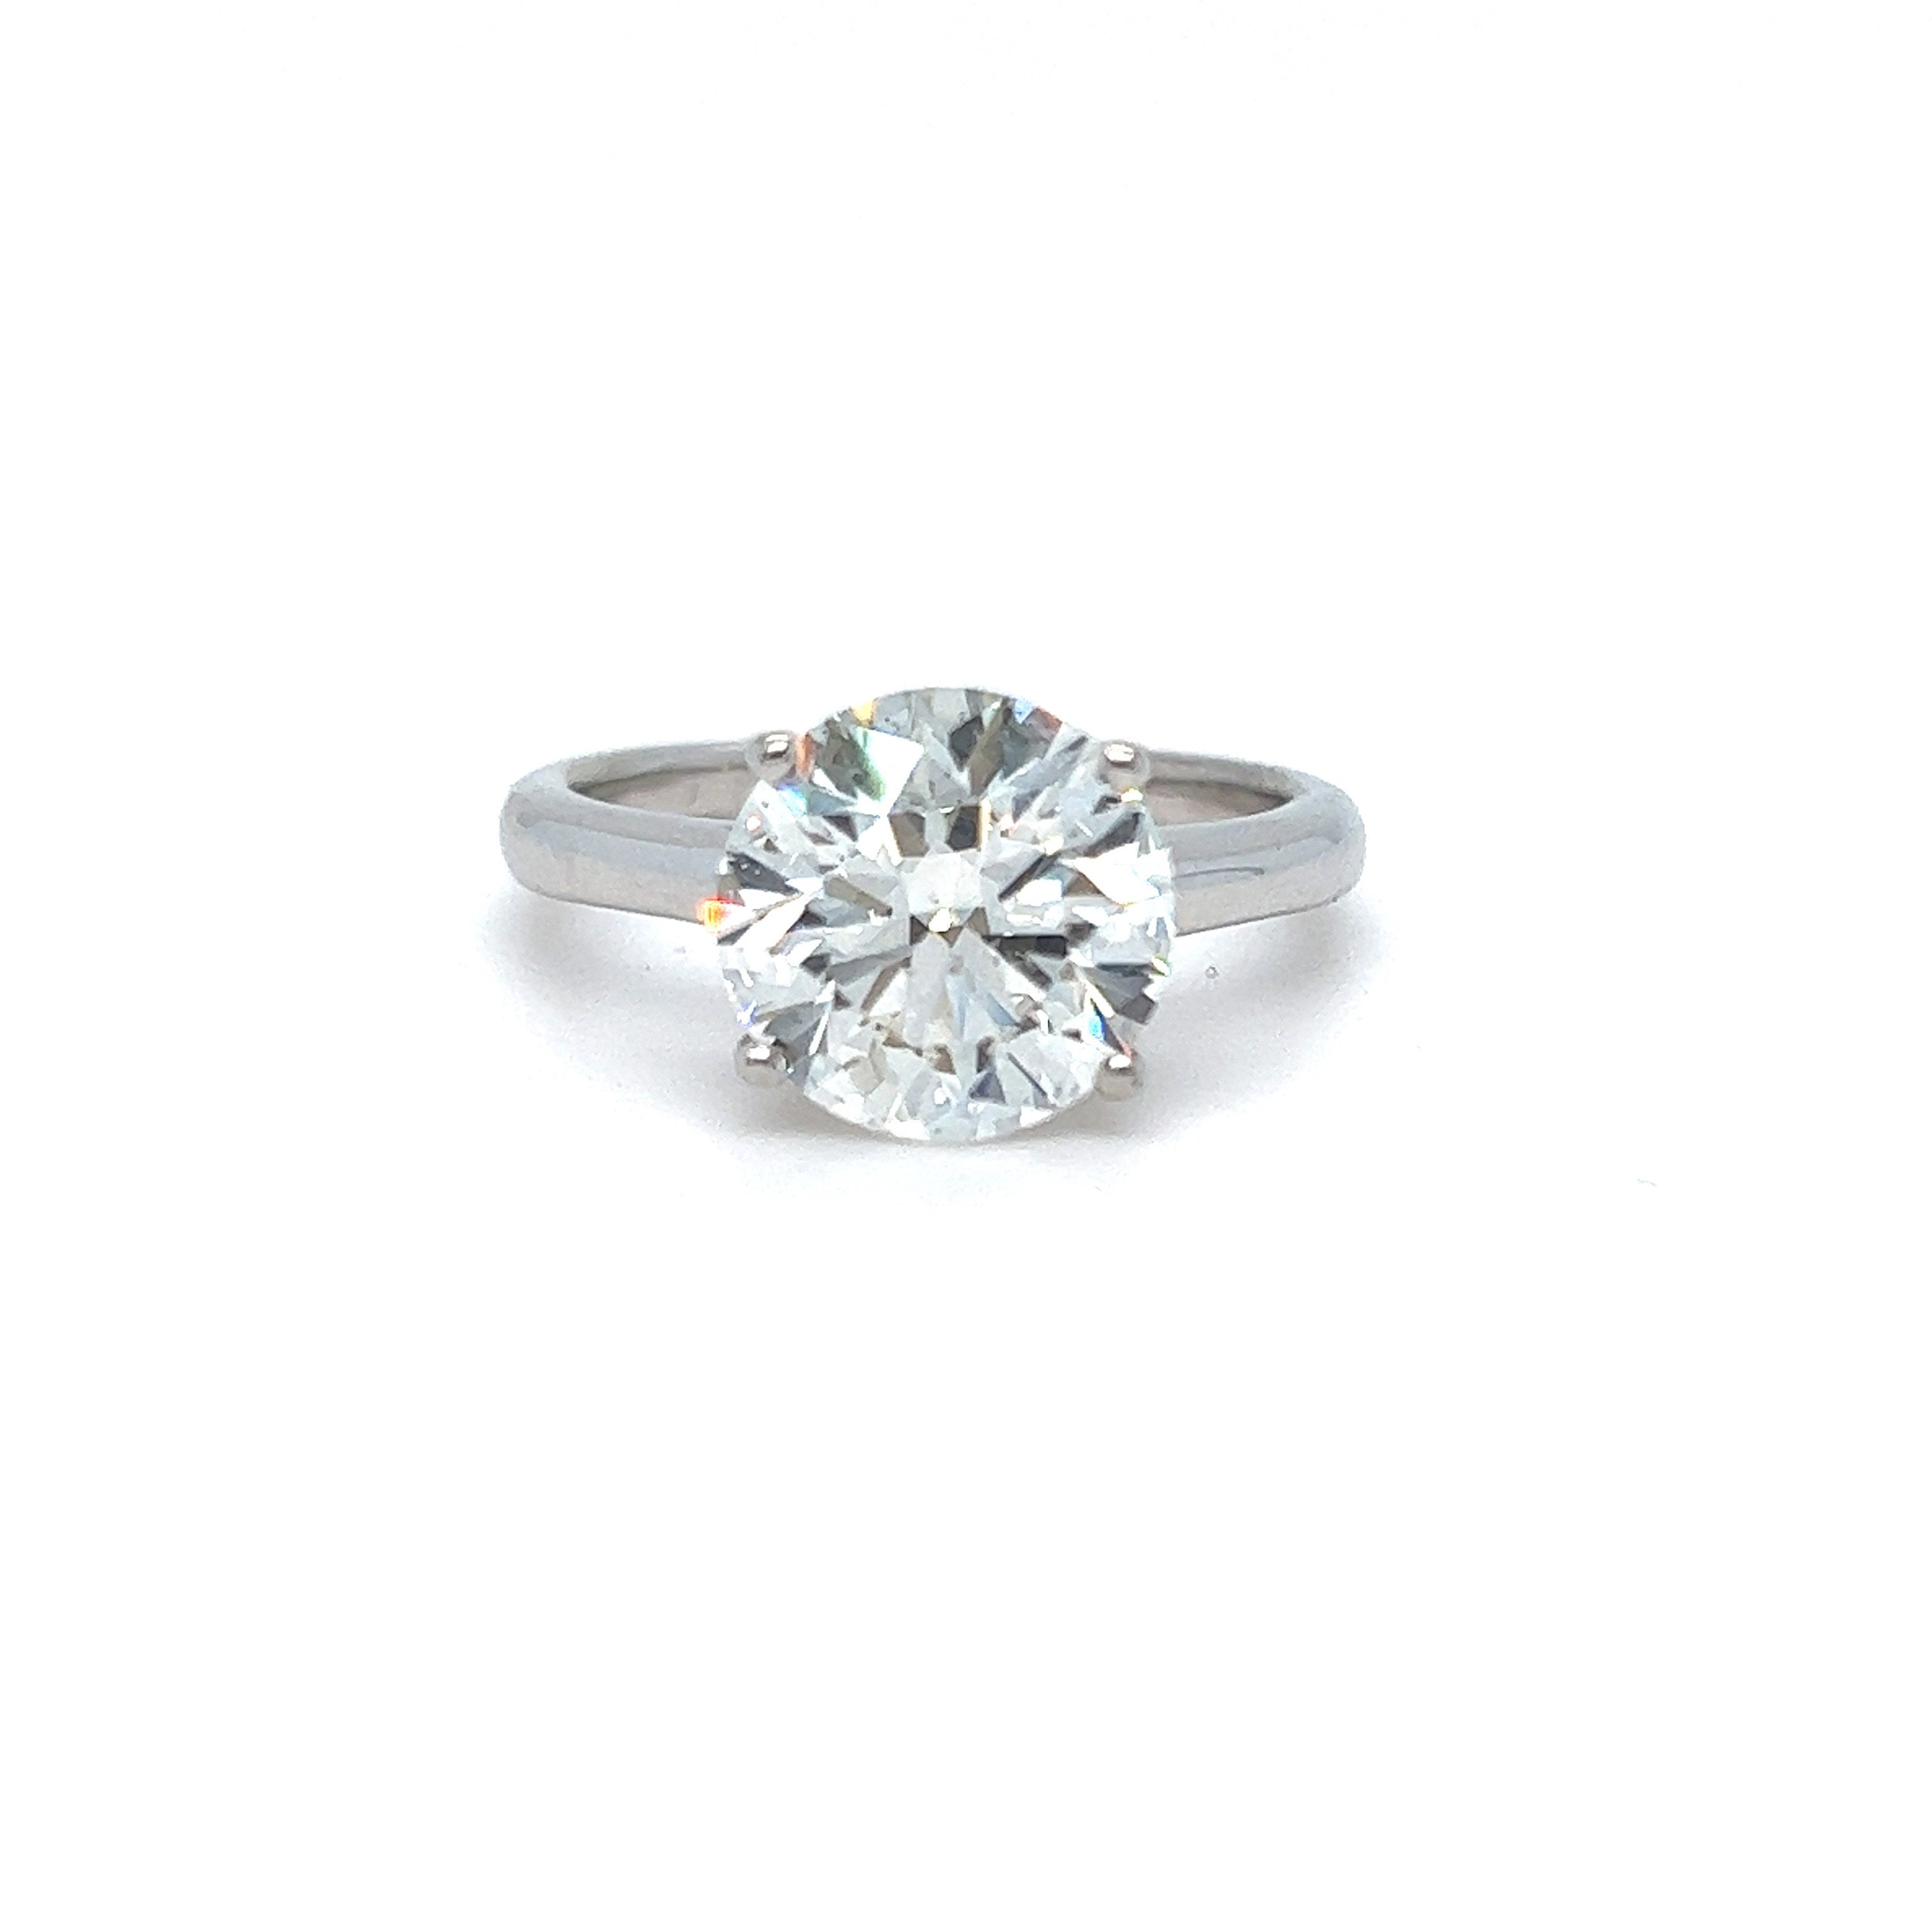 Stunning Large AGS Diamond Solitaire in 18K White Gold - 3.17CT - AGS 0 - Ideal CUT